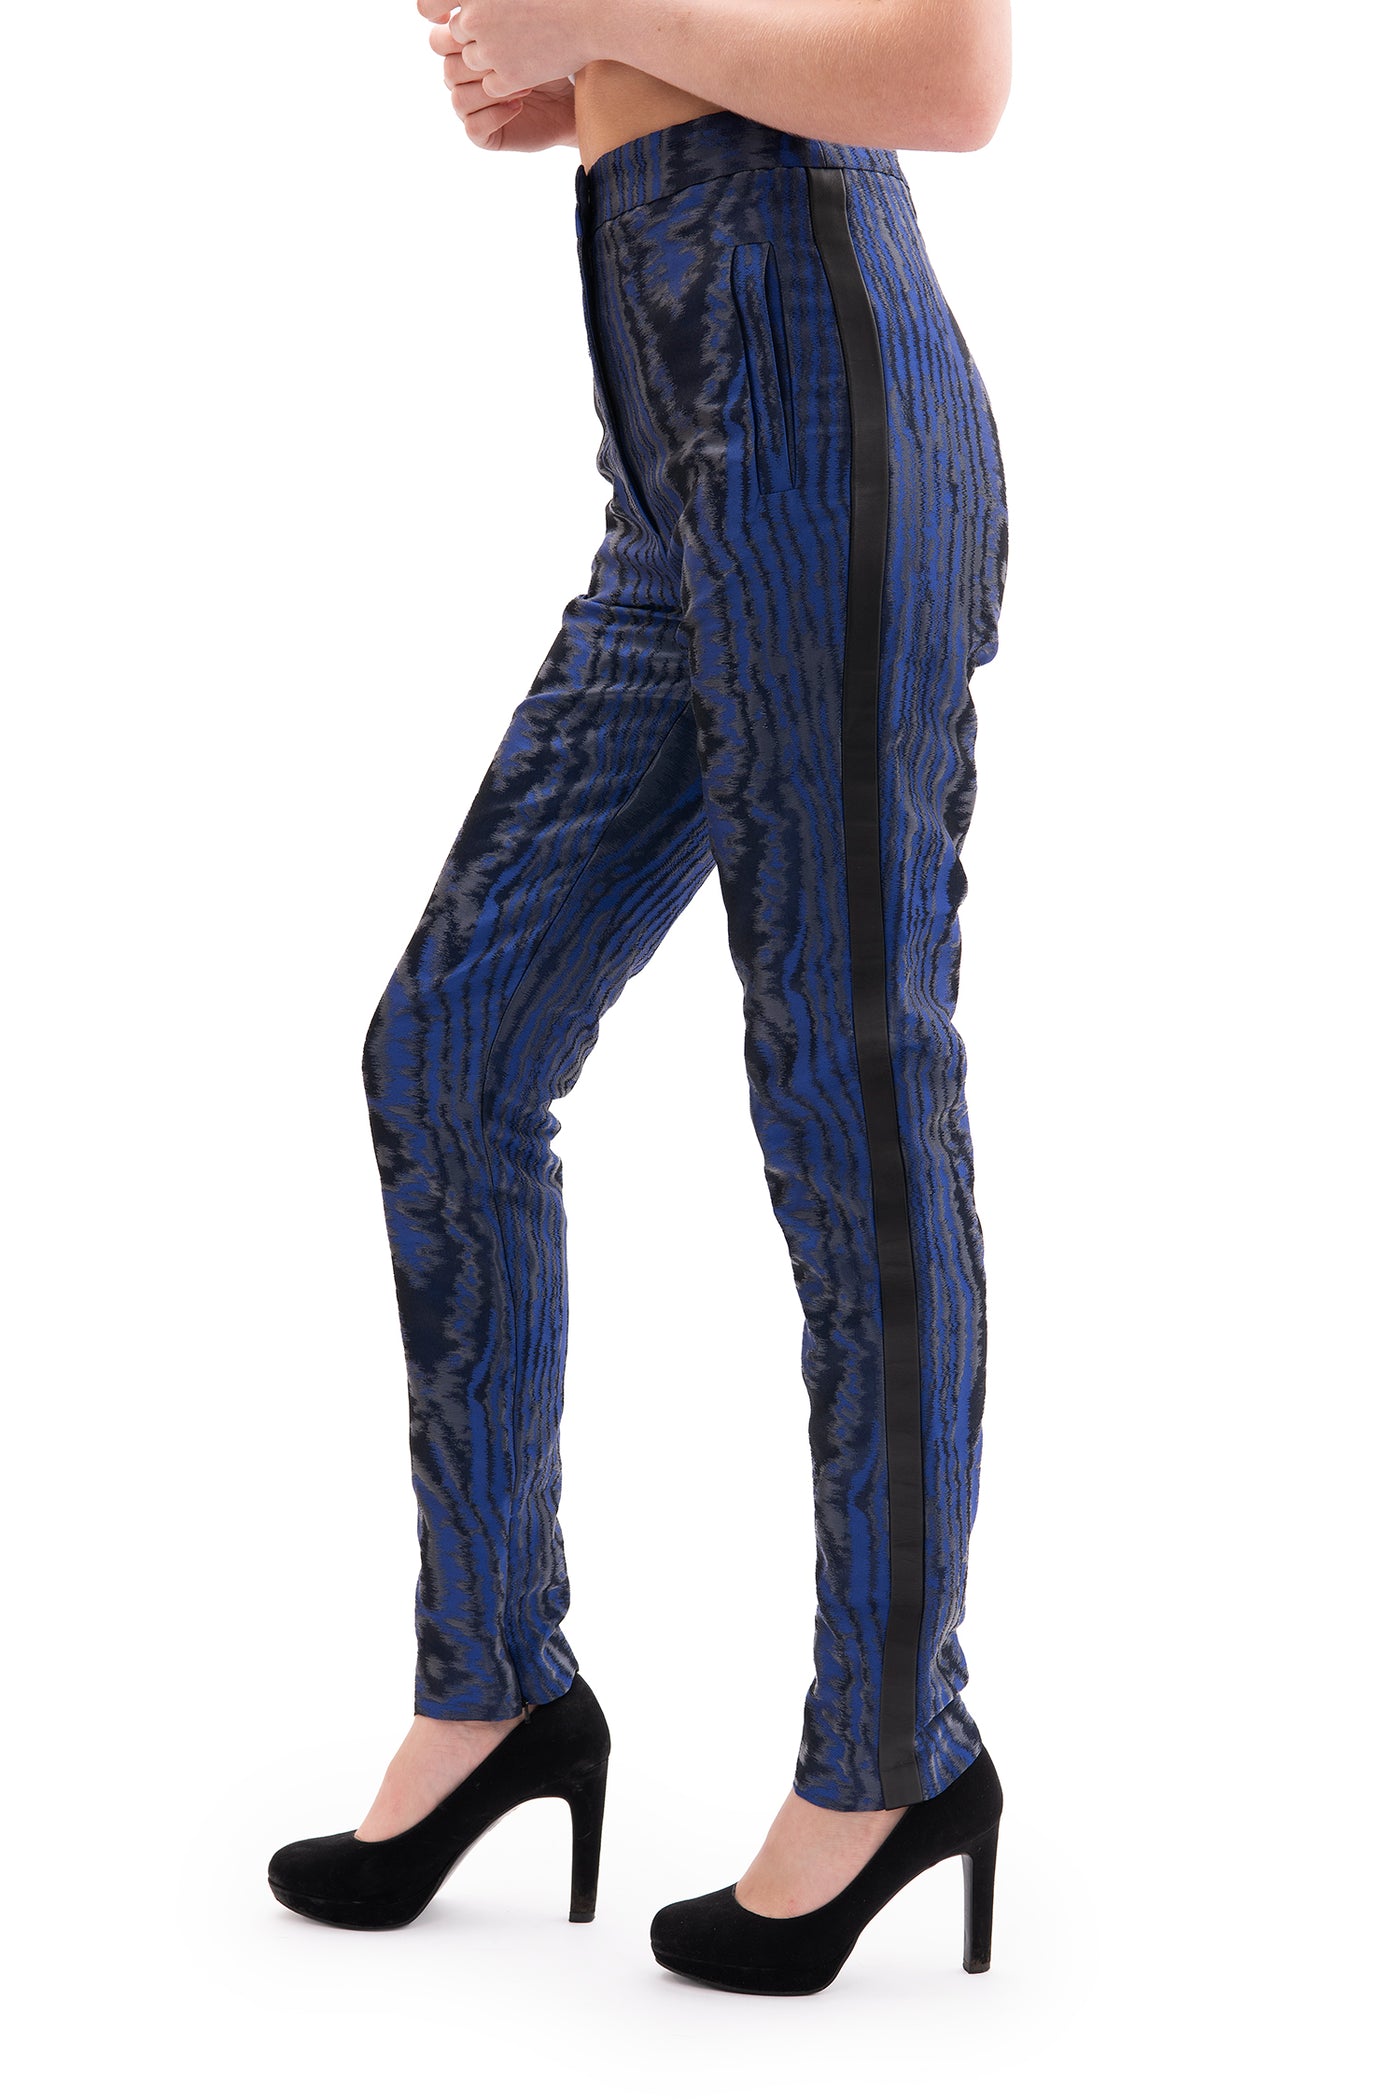 Christopher Kane blue and black trousers moire super